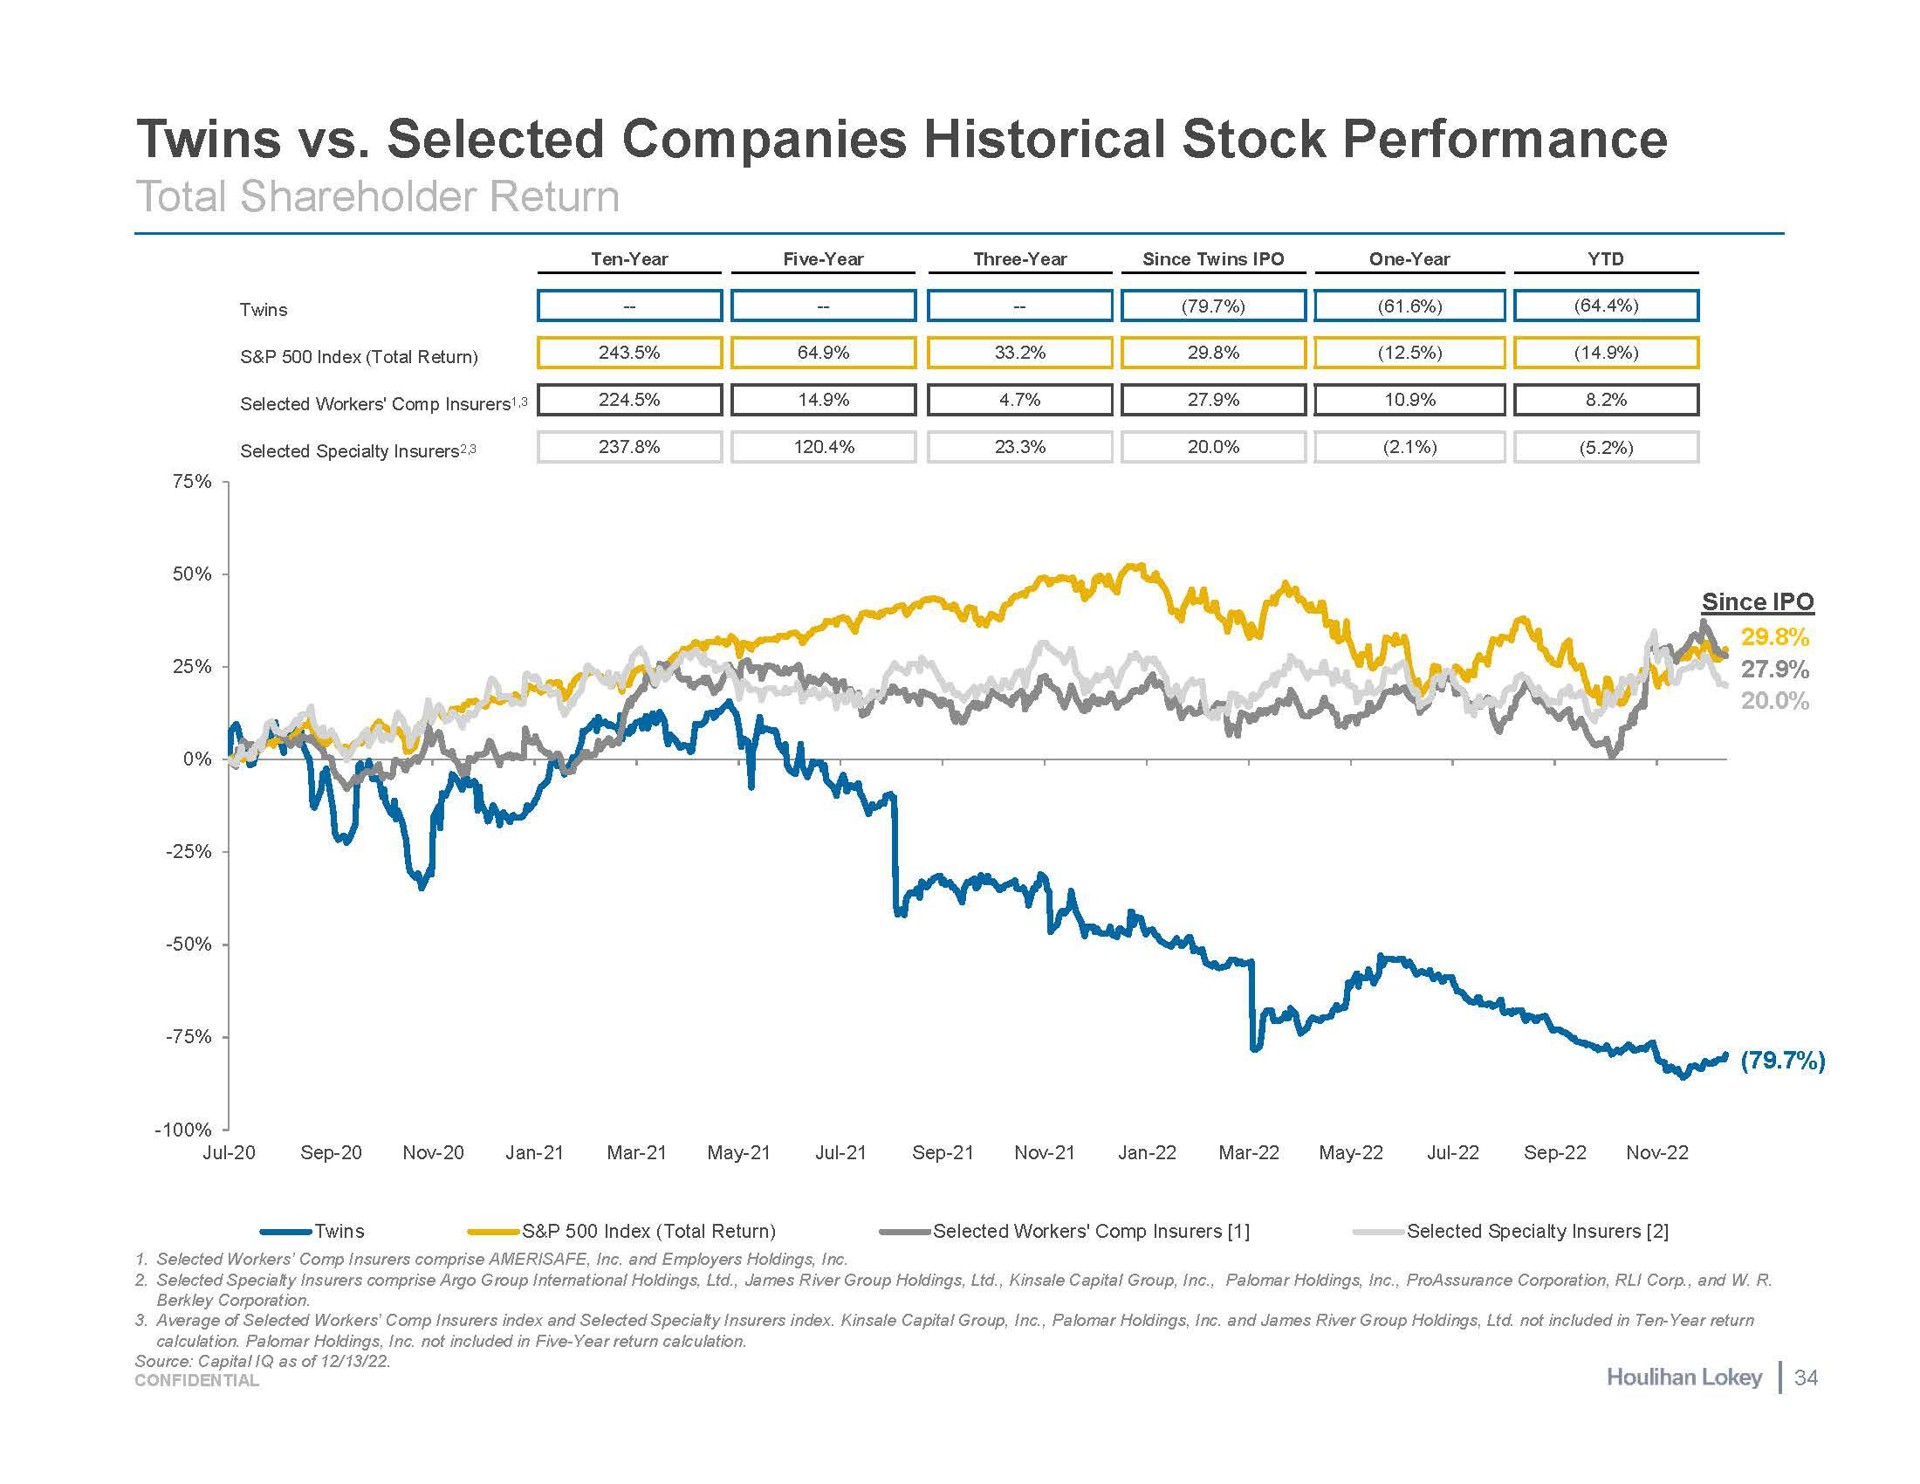 twins selected companies historical stock performance tal twins selected workers insurers is | Houlihan Lokey